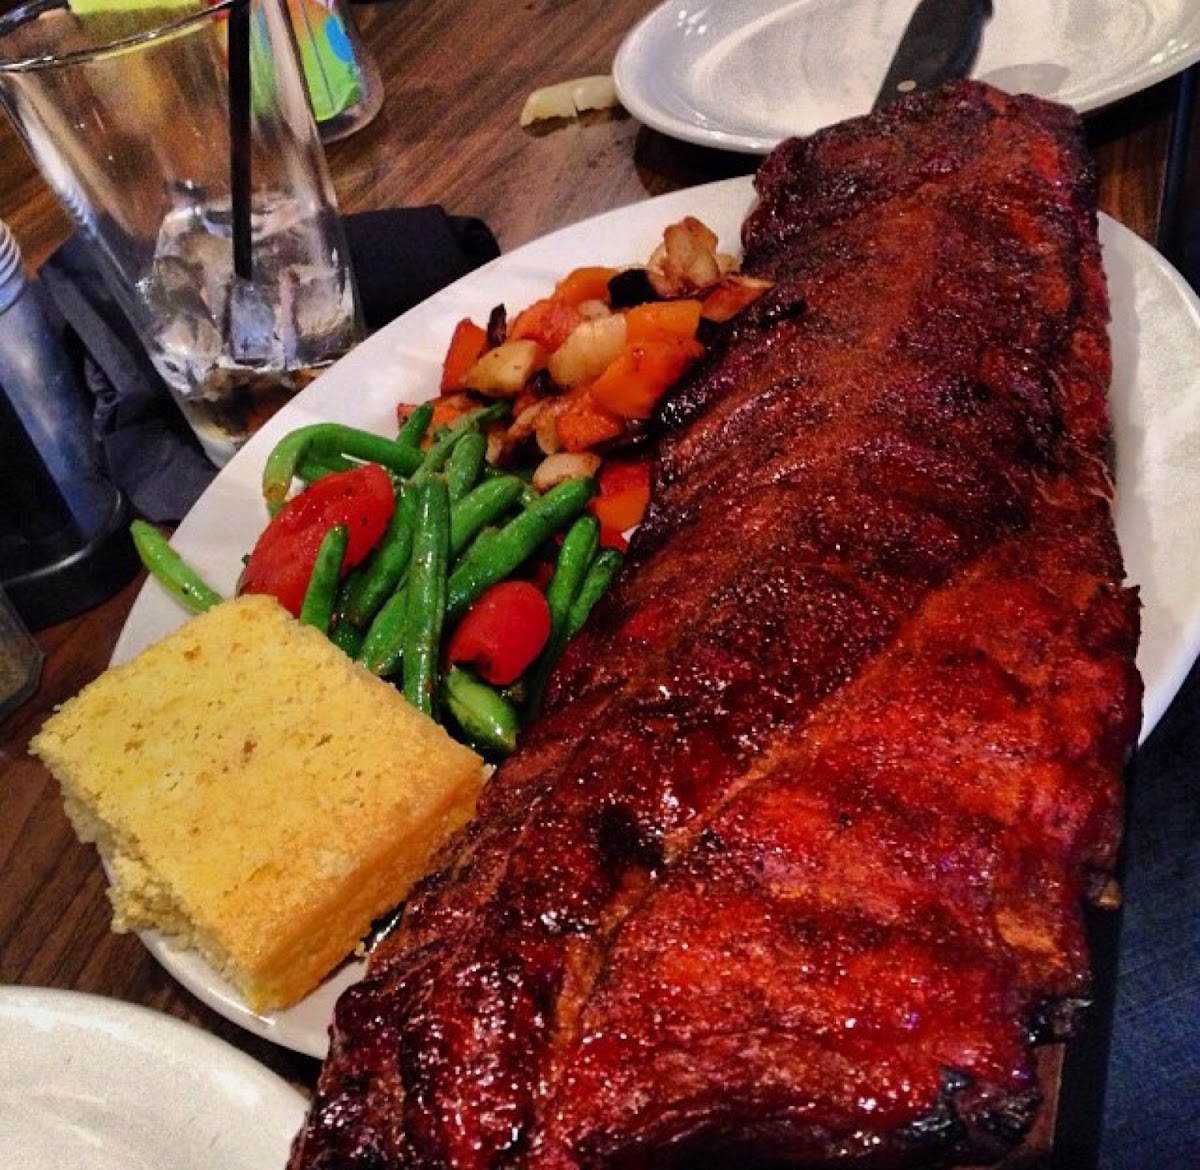 Shared this full rack with my husband. He ate the corn bread. I'm not celiac so I am not worried abo